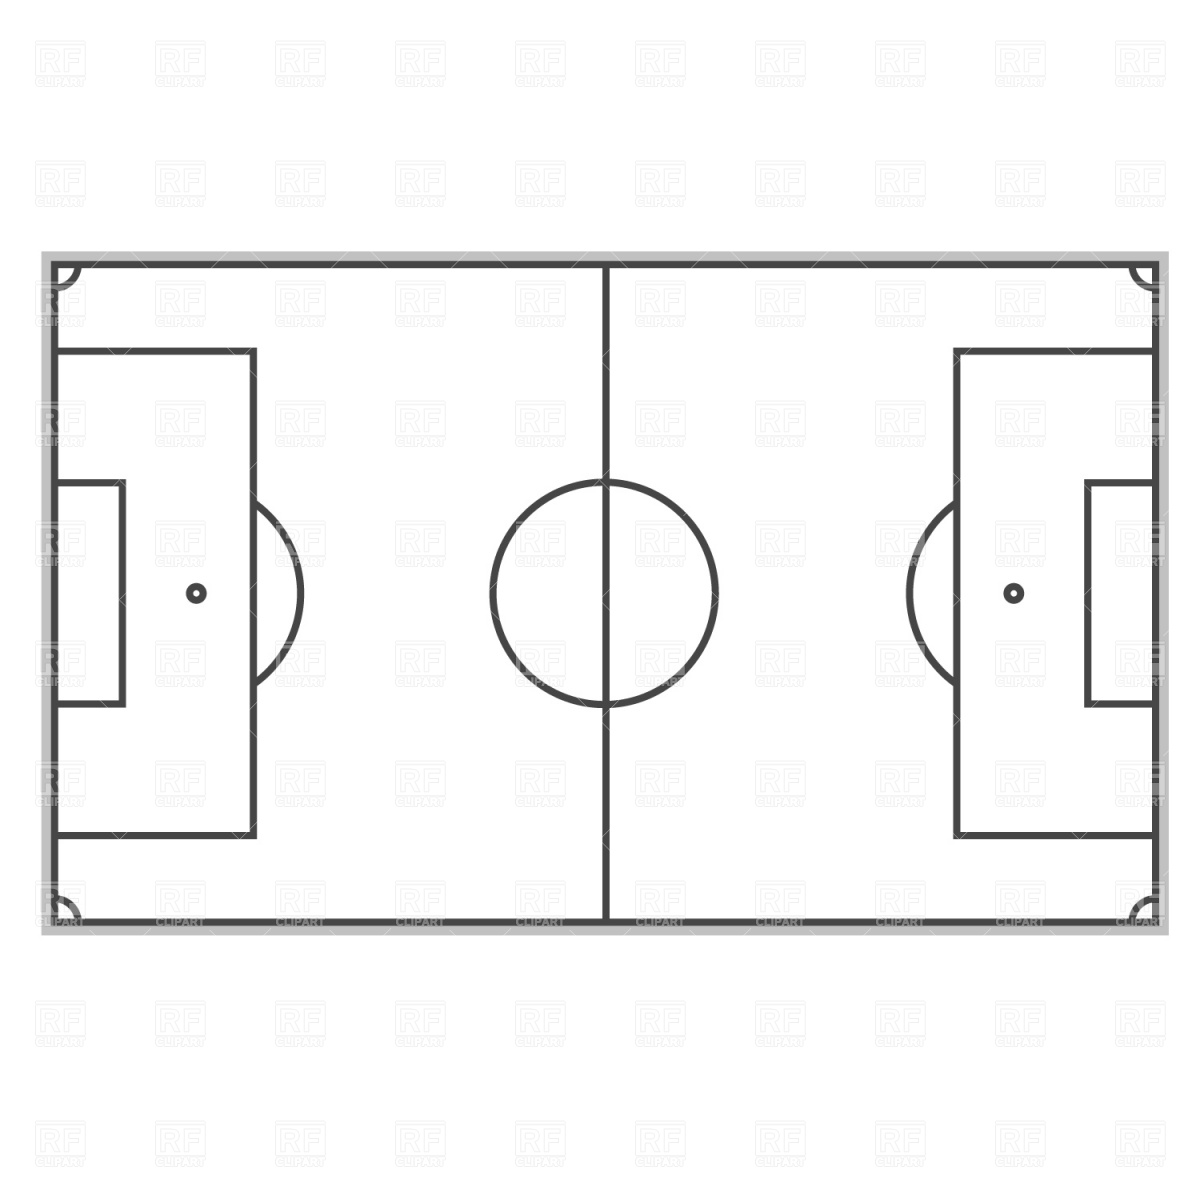 Soccer Field Layout - Cliparts.co